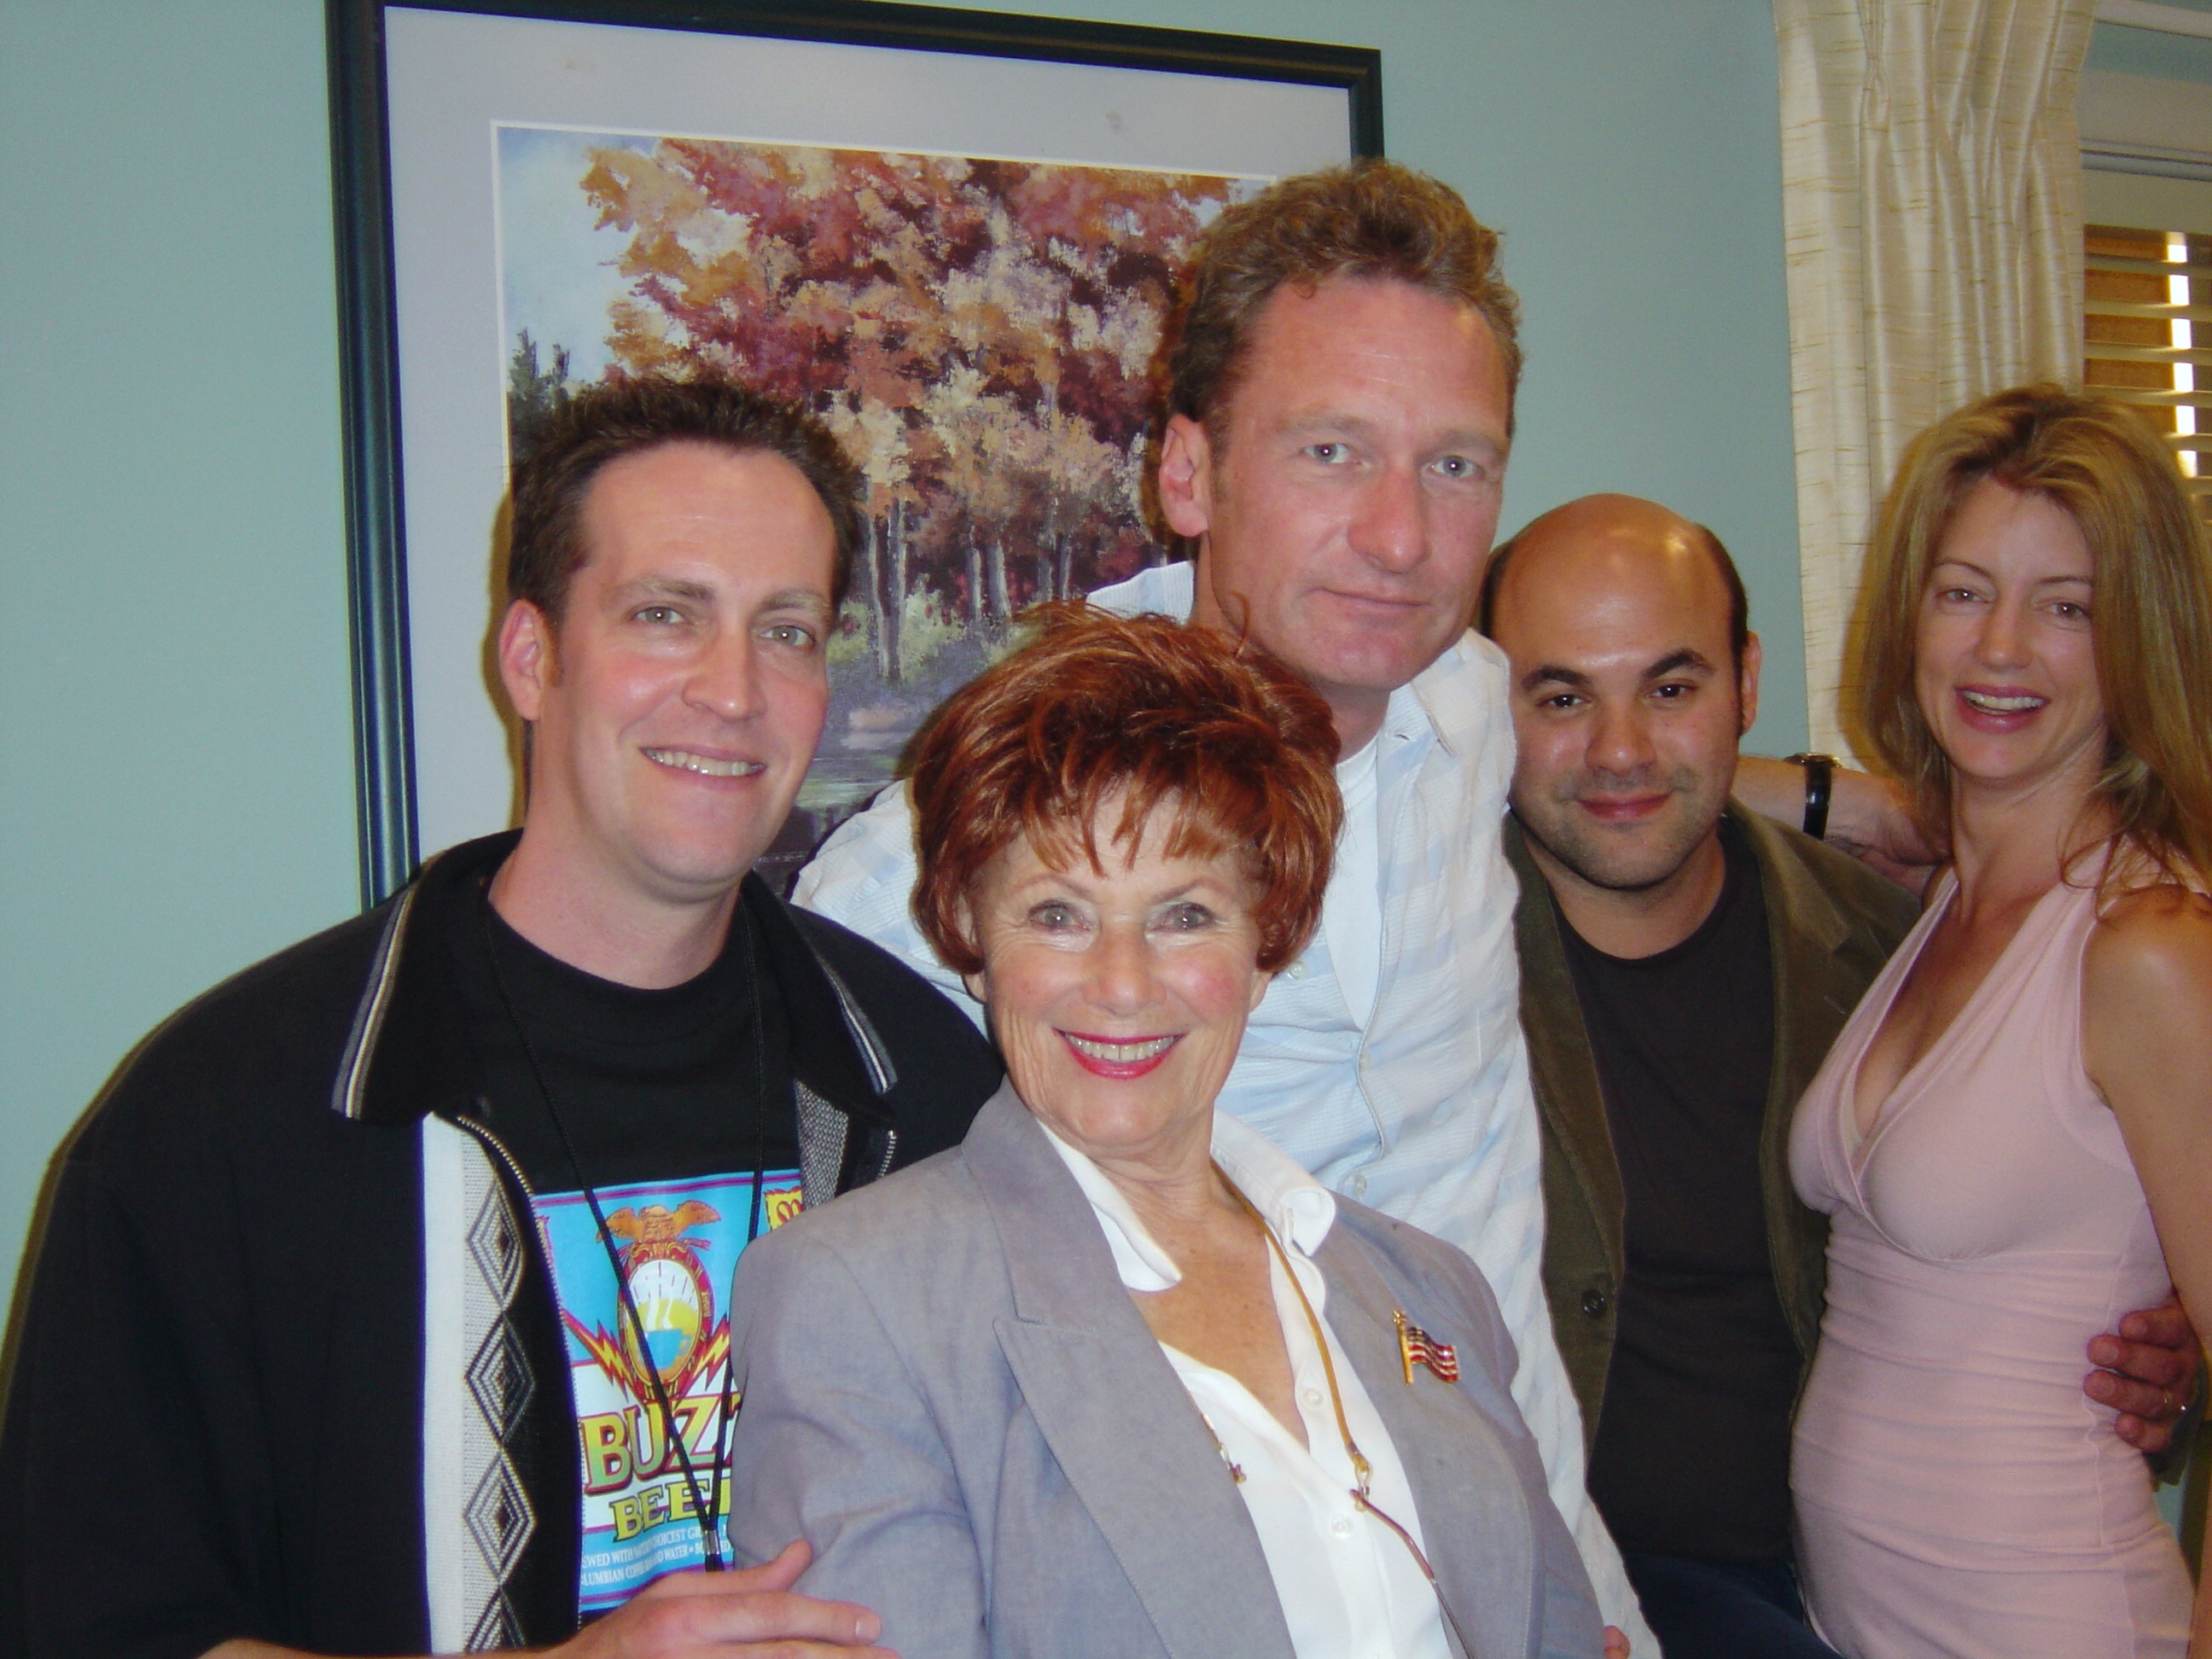 The very last day of filming on the final episode of The Drew Carey Show. L to R: Me, Marion Ross, Ryan Stiles, Ian Gomez, and Cynthia Watros. Really terrific group of folks.